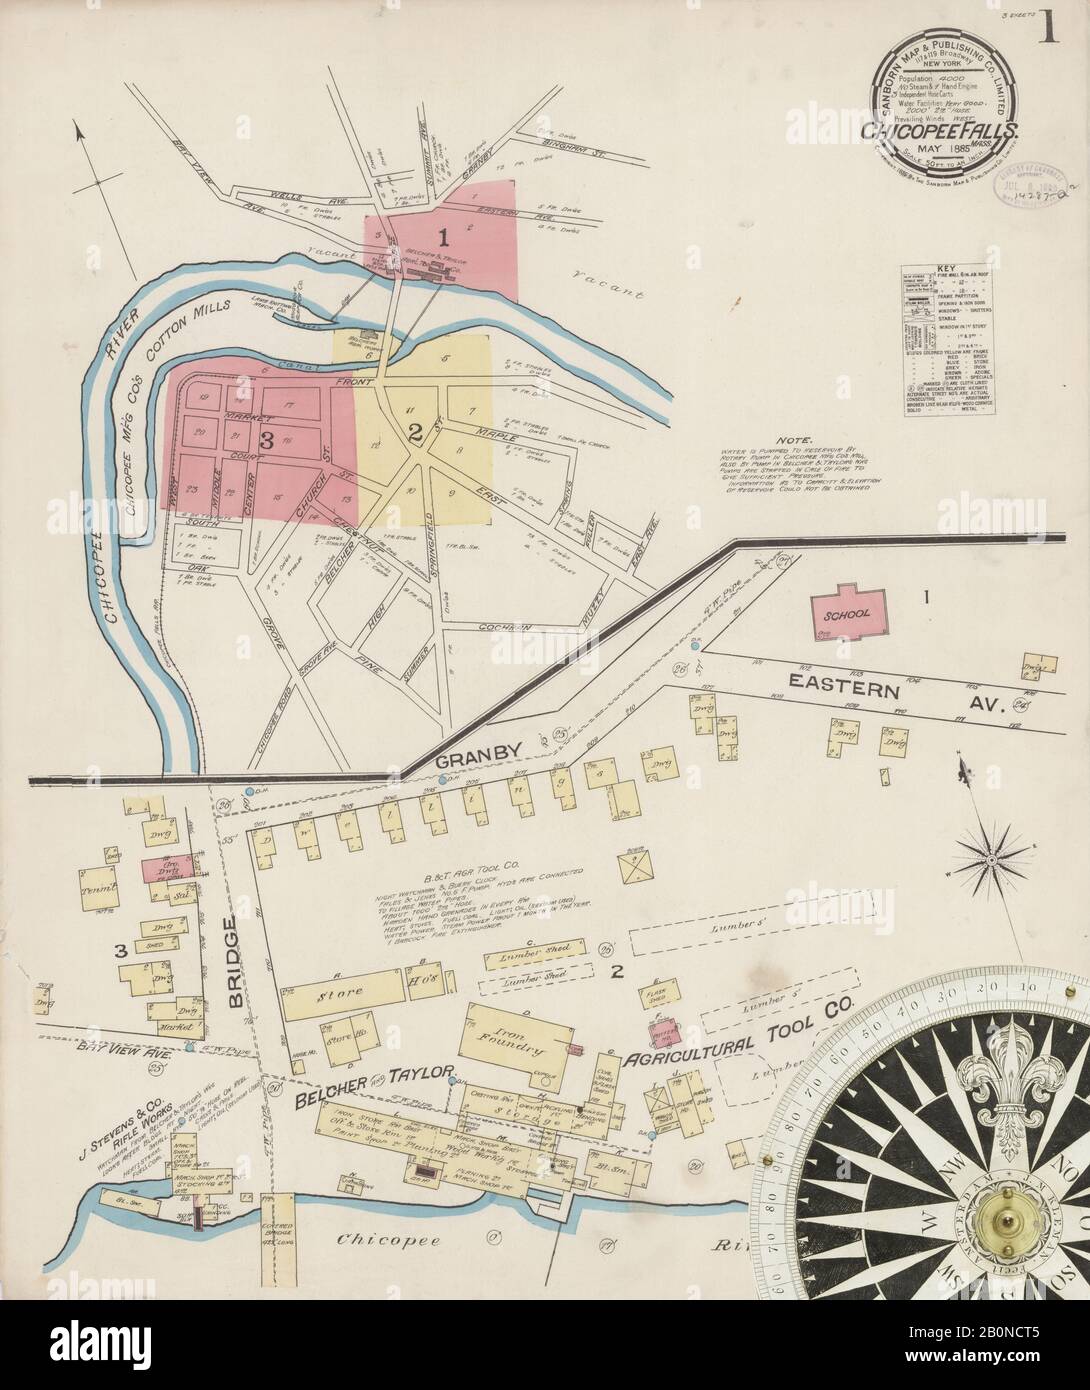 Image 1 of Sanborn Fire Insurance Map from Chicopee Falls, Hampden County, Massachusetts. May 1885. 3 Sheet(s), America, street map with a Nineteenth Century compass Stock Photo